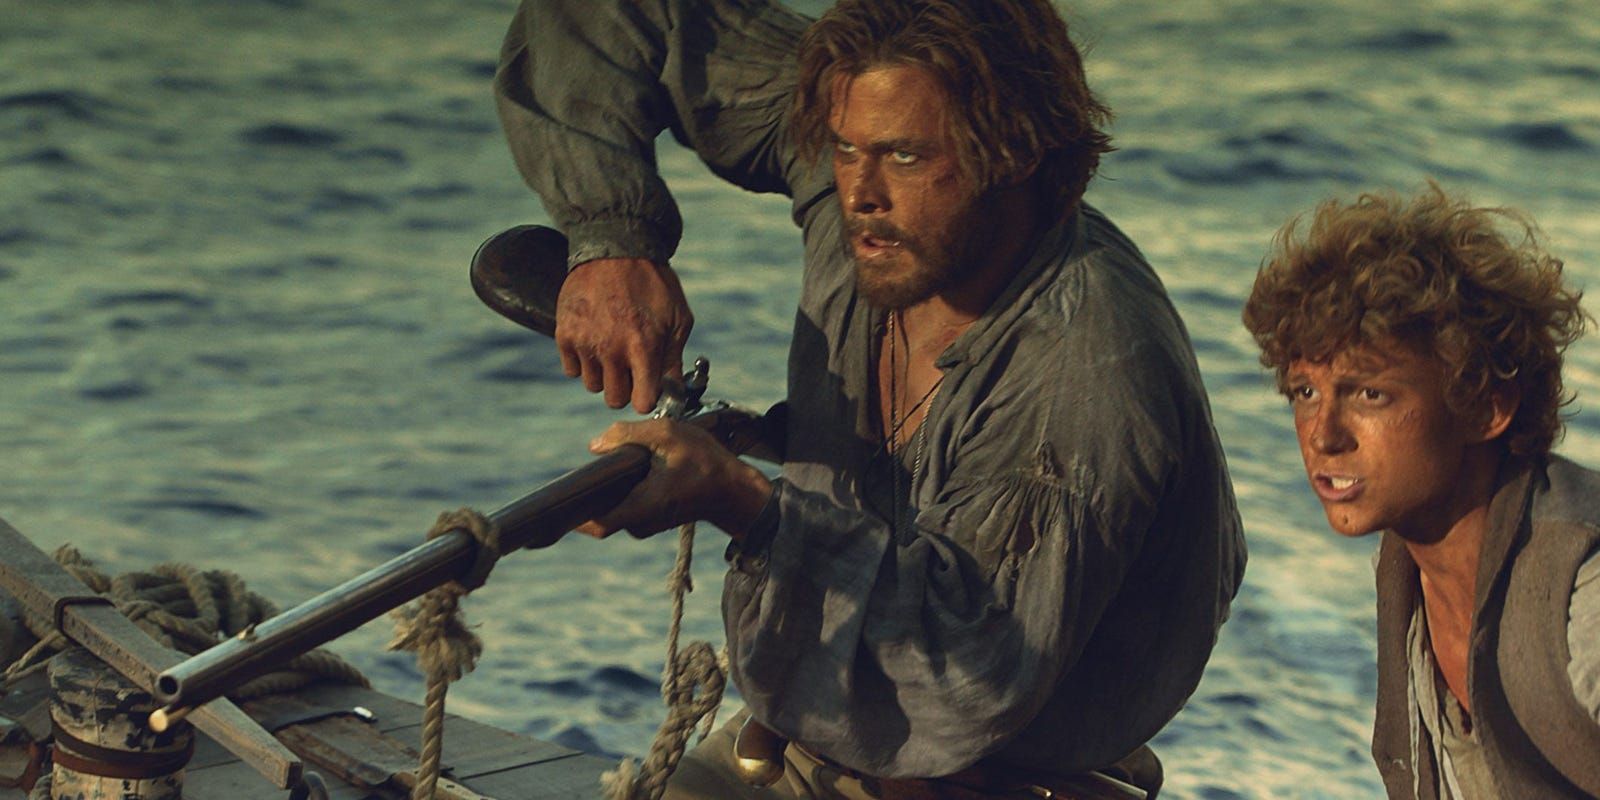 Chris Hemsworth and Tom Holland on a boat in In the Heart of the Sea